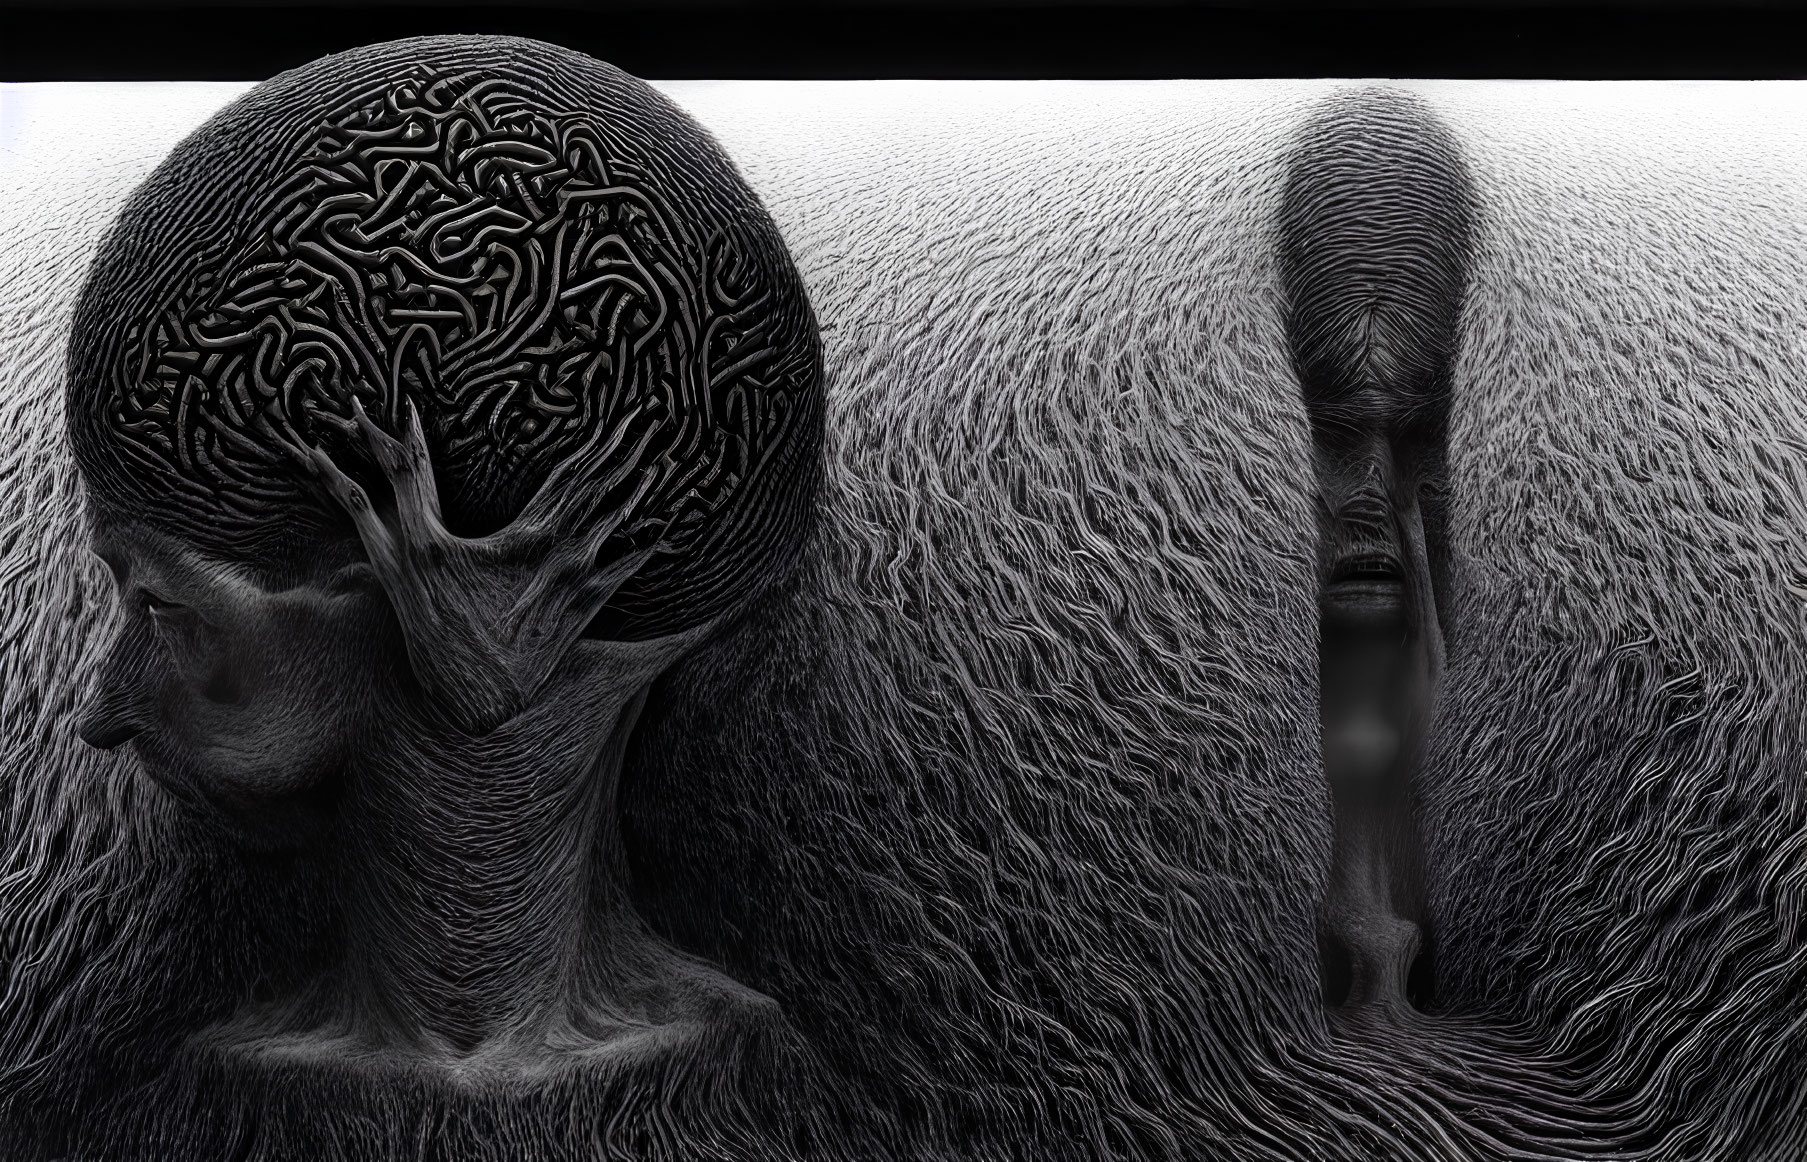 Surreal Artwork: Two Figures with Maze-like Heads in Textured Landscape